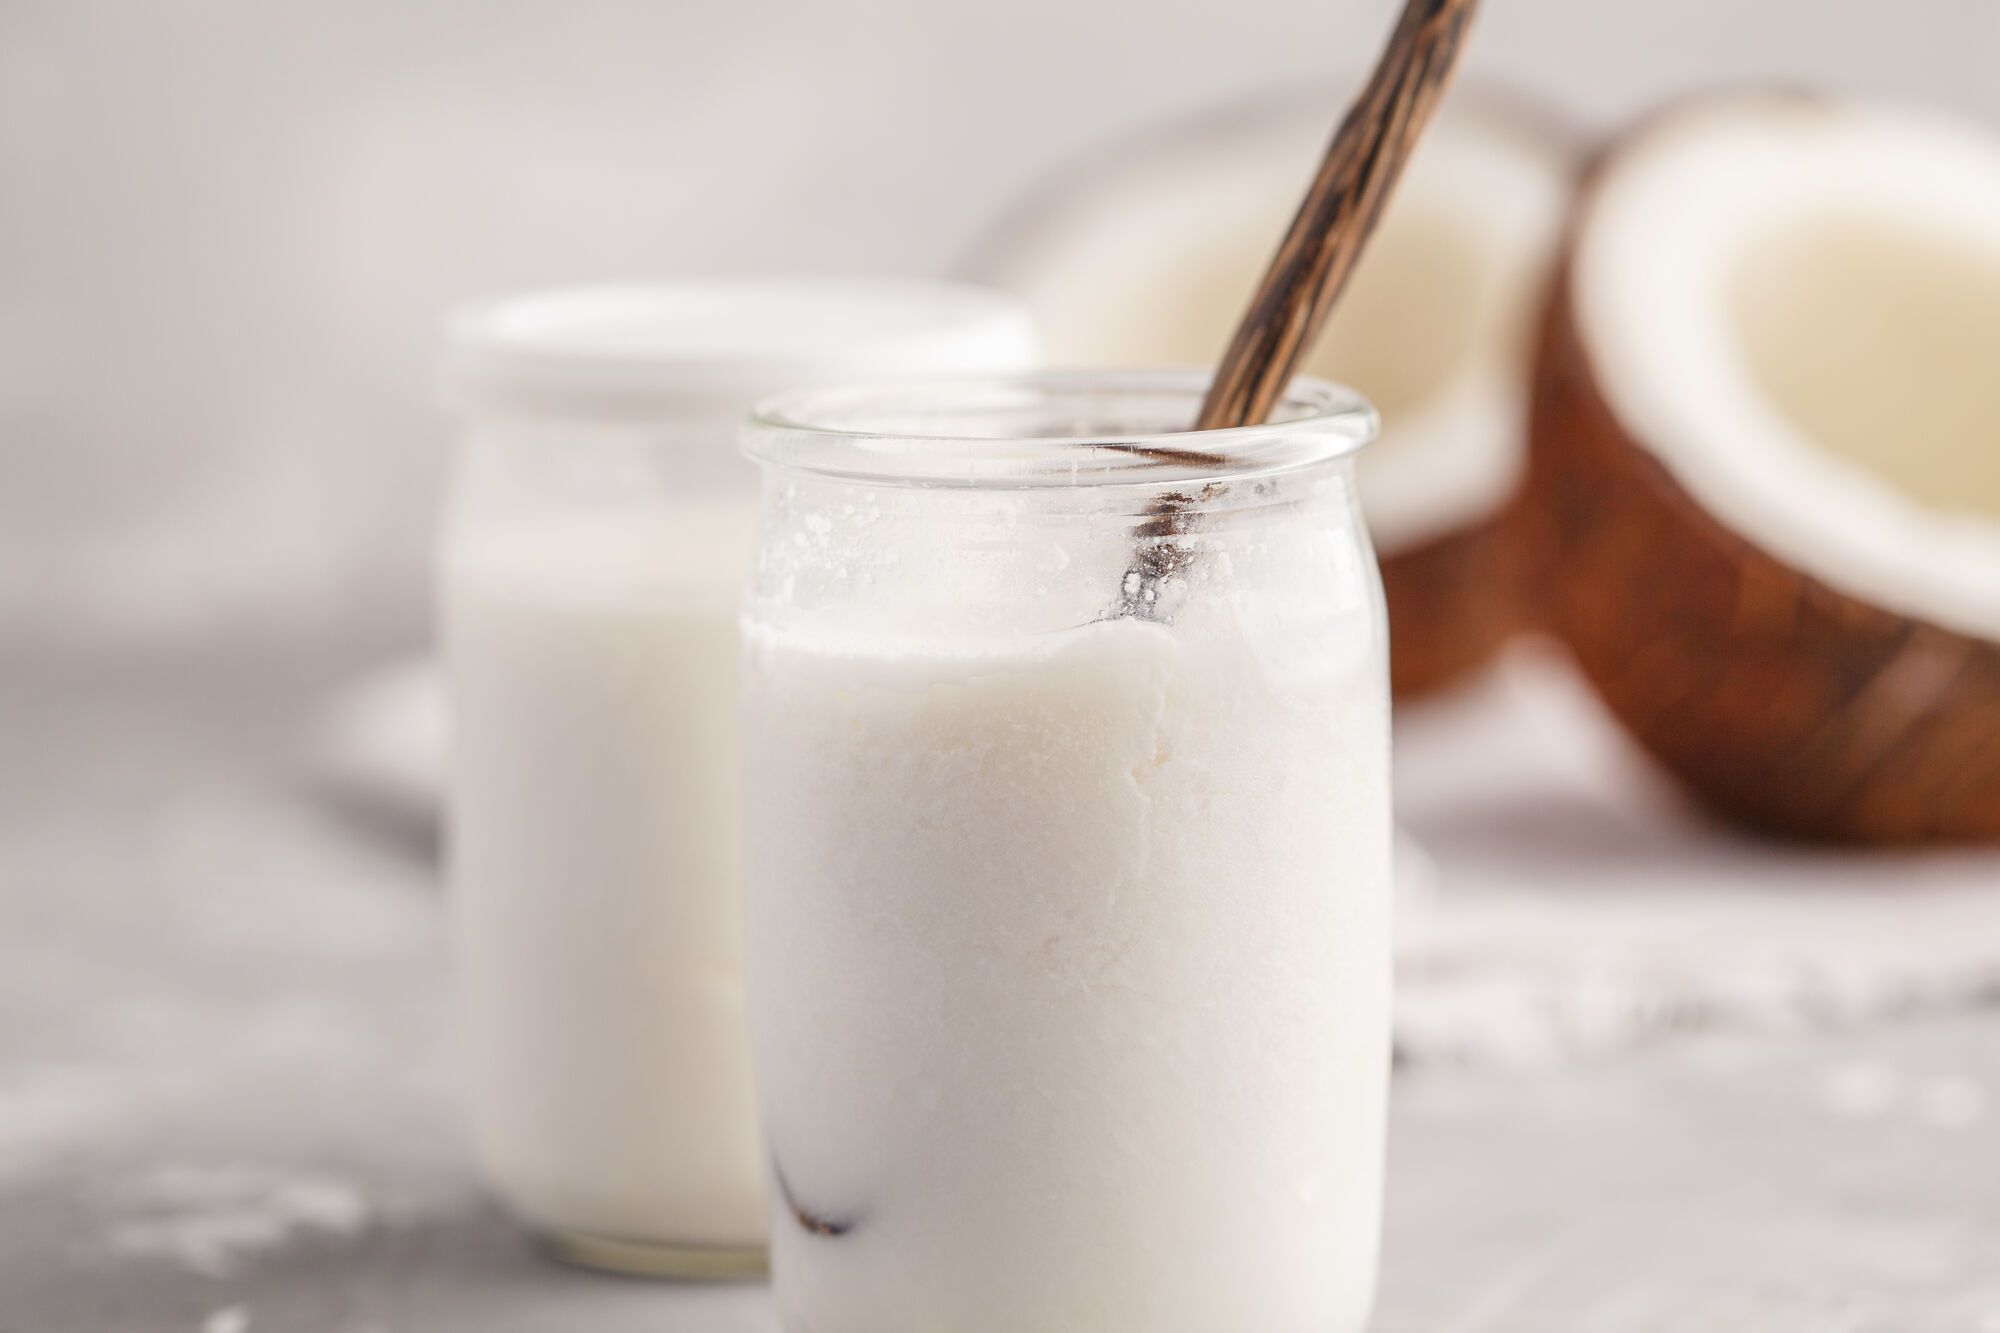 How to choose high-quality kefir: pay attention to the composition. Expert advice